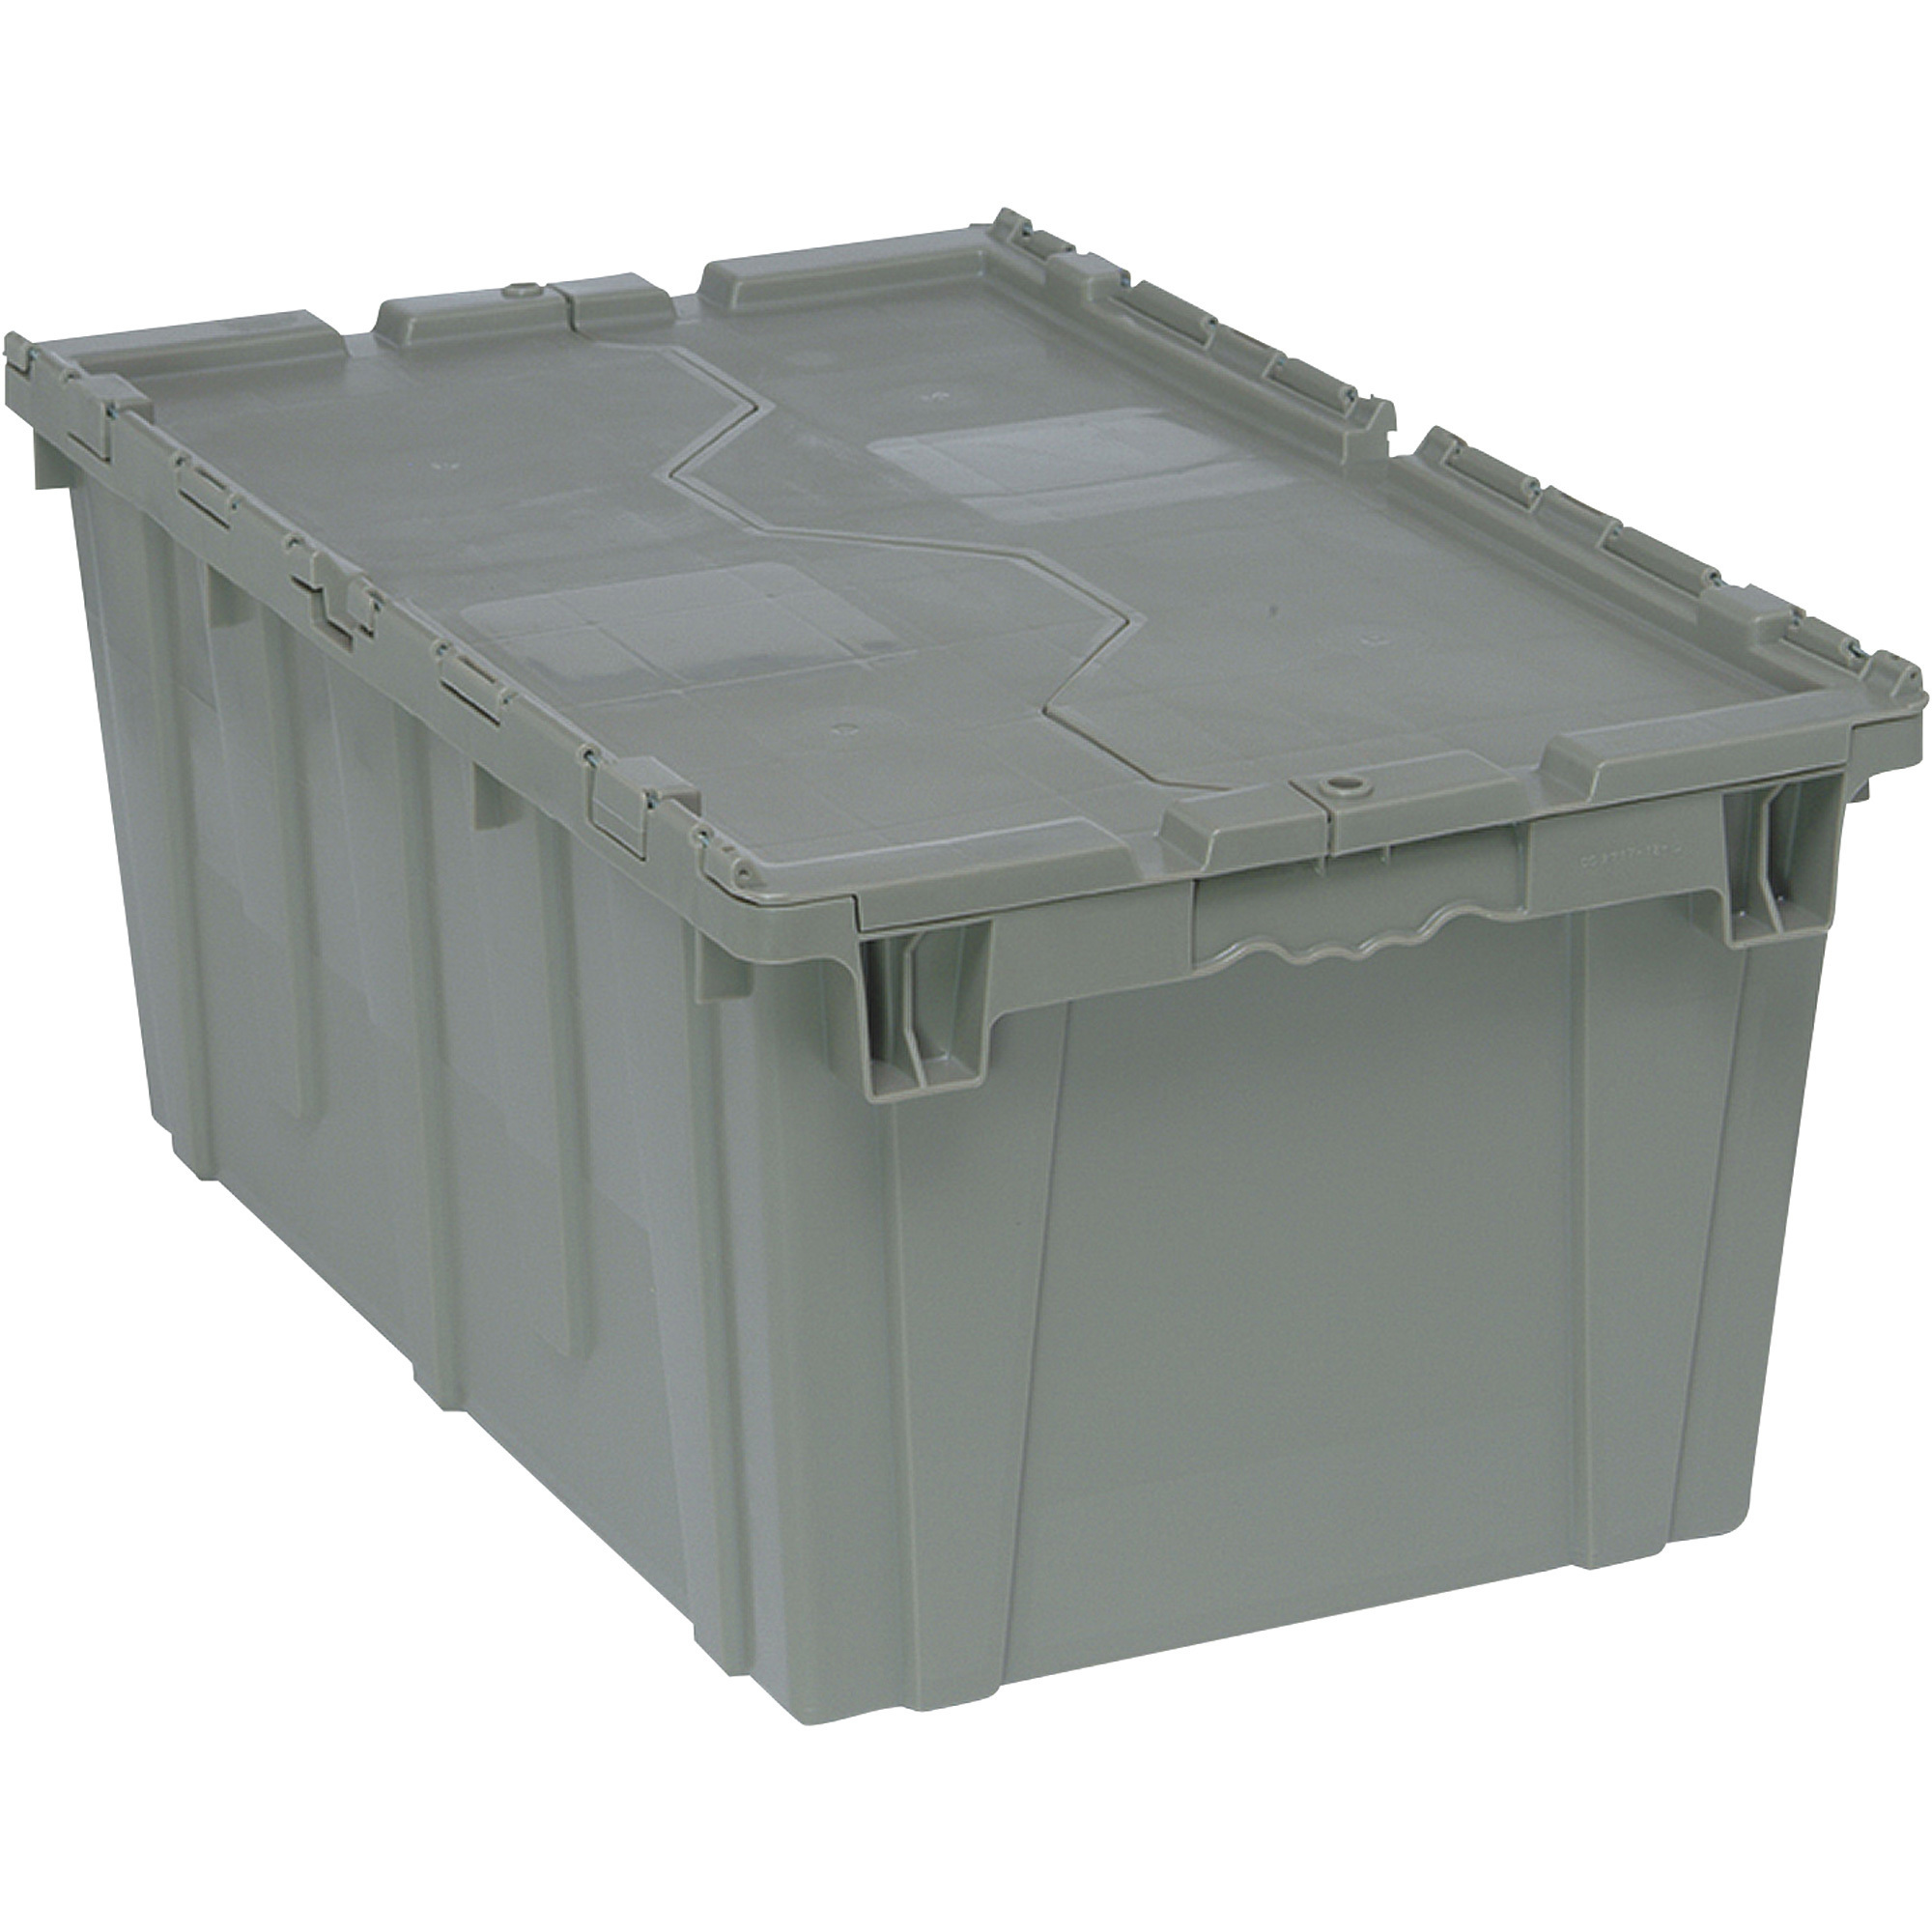 Quantum Storage Heavy Duty Attached Top Container, 27Inch x 17 3/4Inch x 12 1/2Inch Size, Model RQDC2717-12